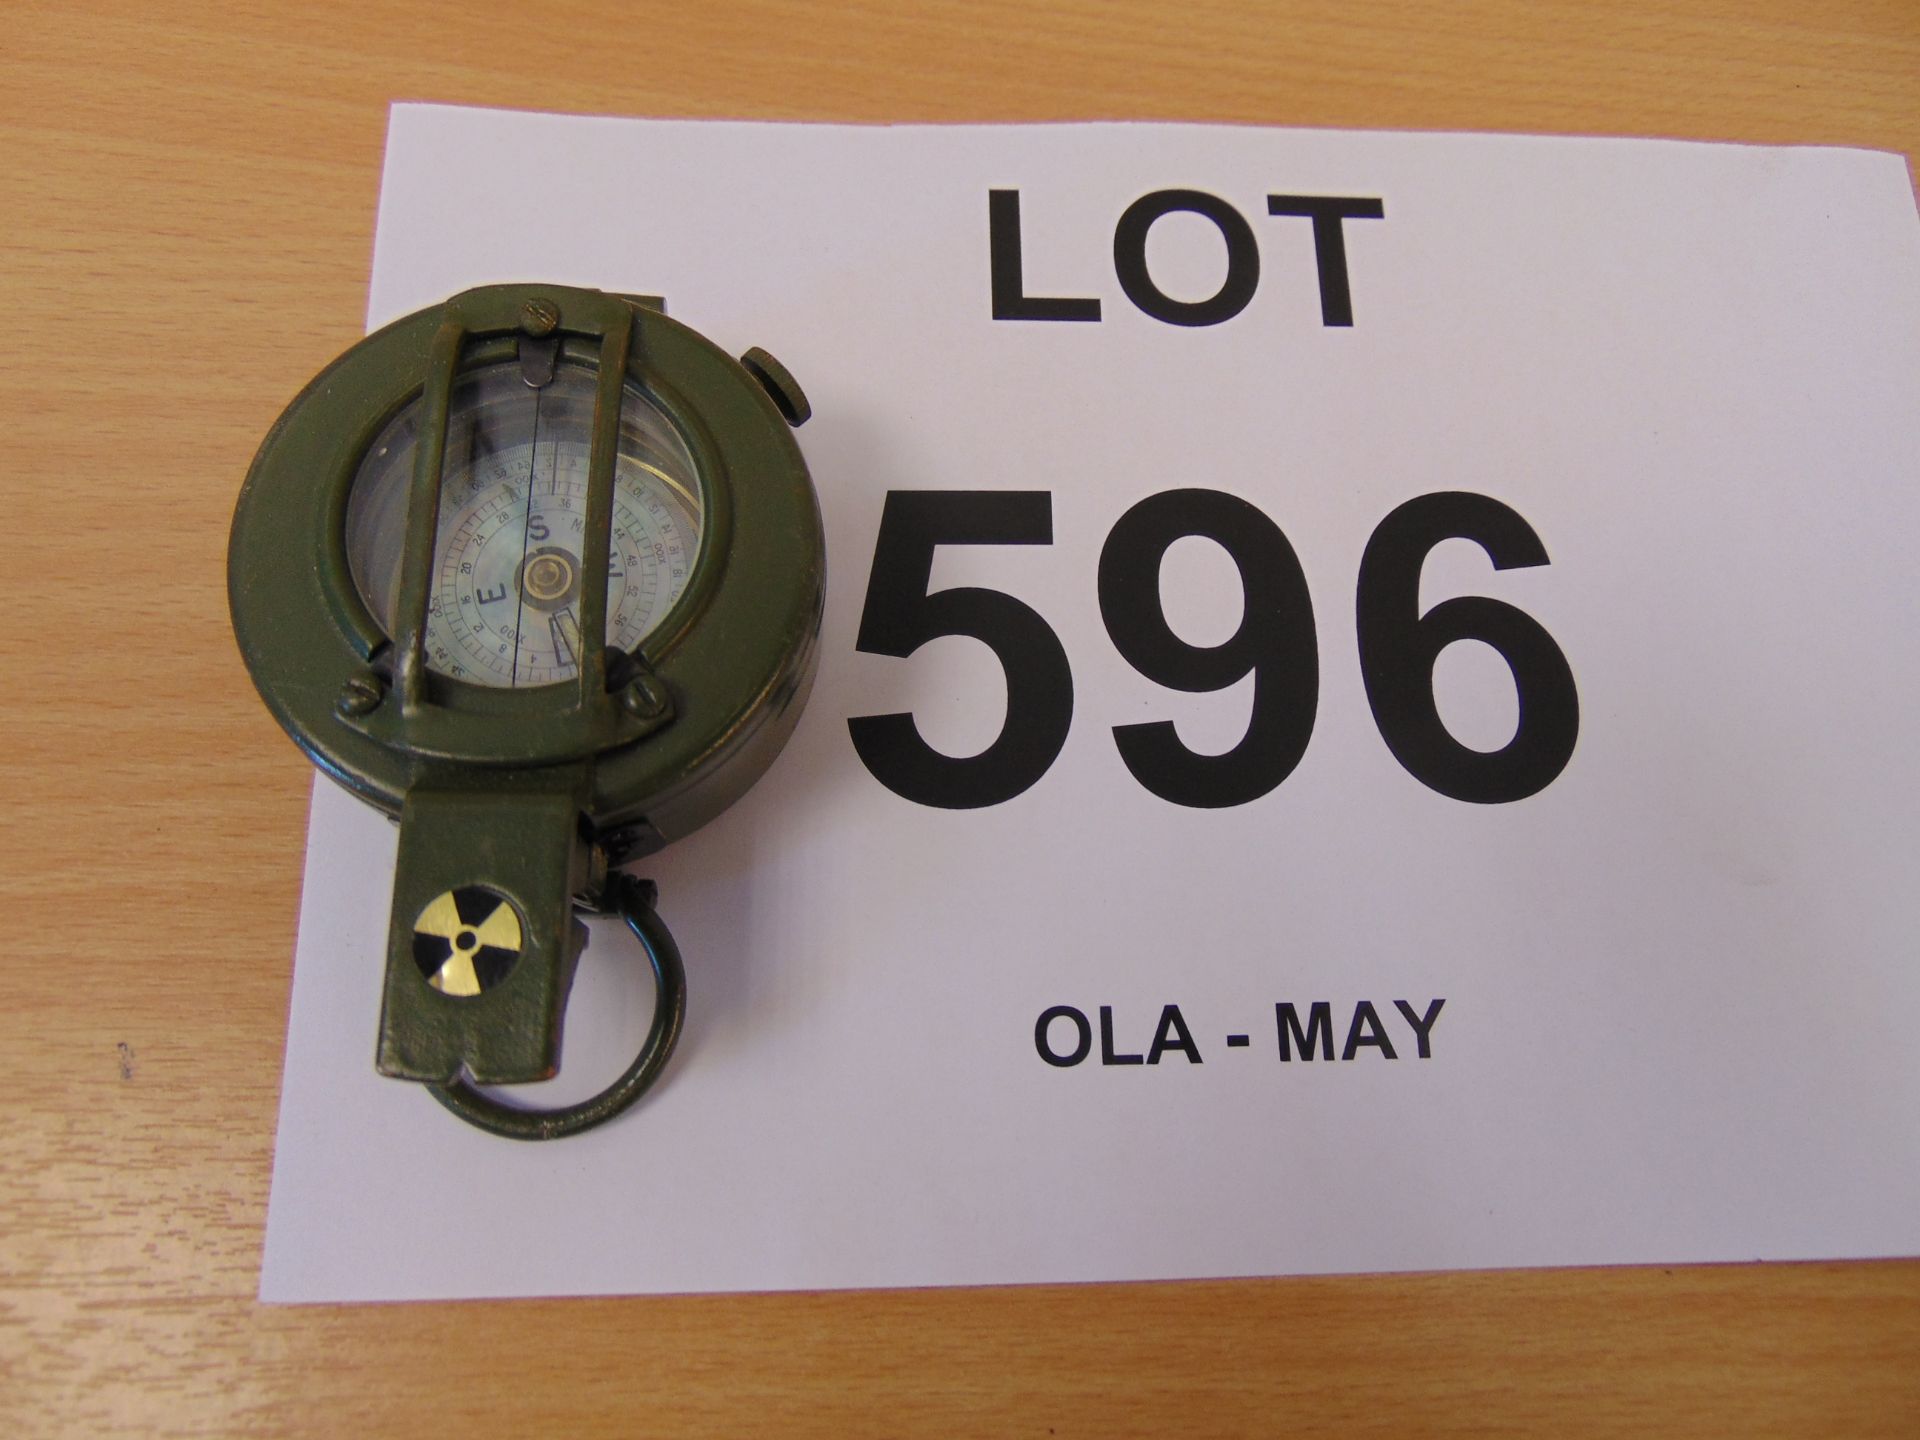 Stanley London British Army Issue Brass Compass in Mils Nato Marks. - Image 3 of 3